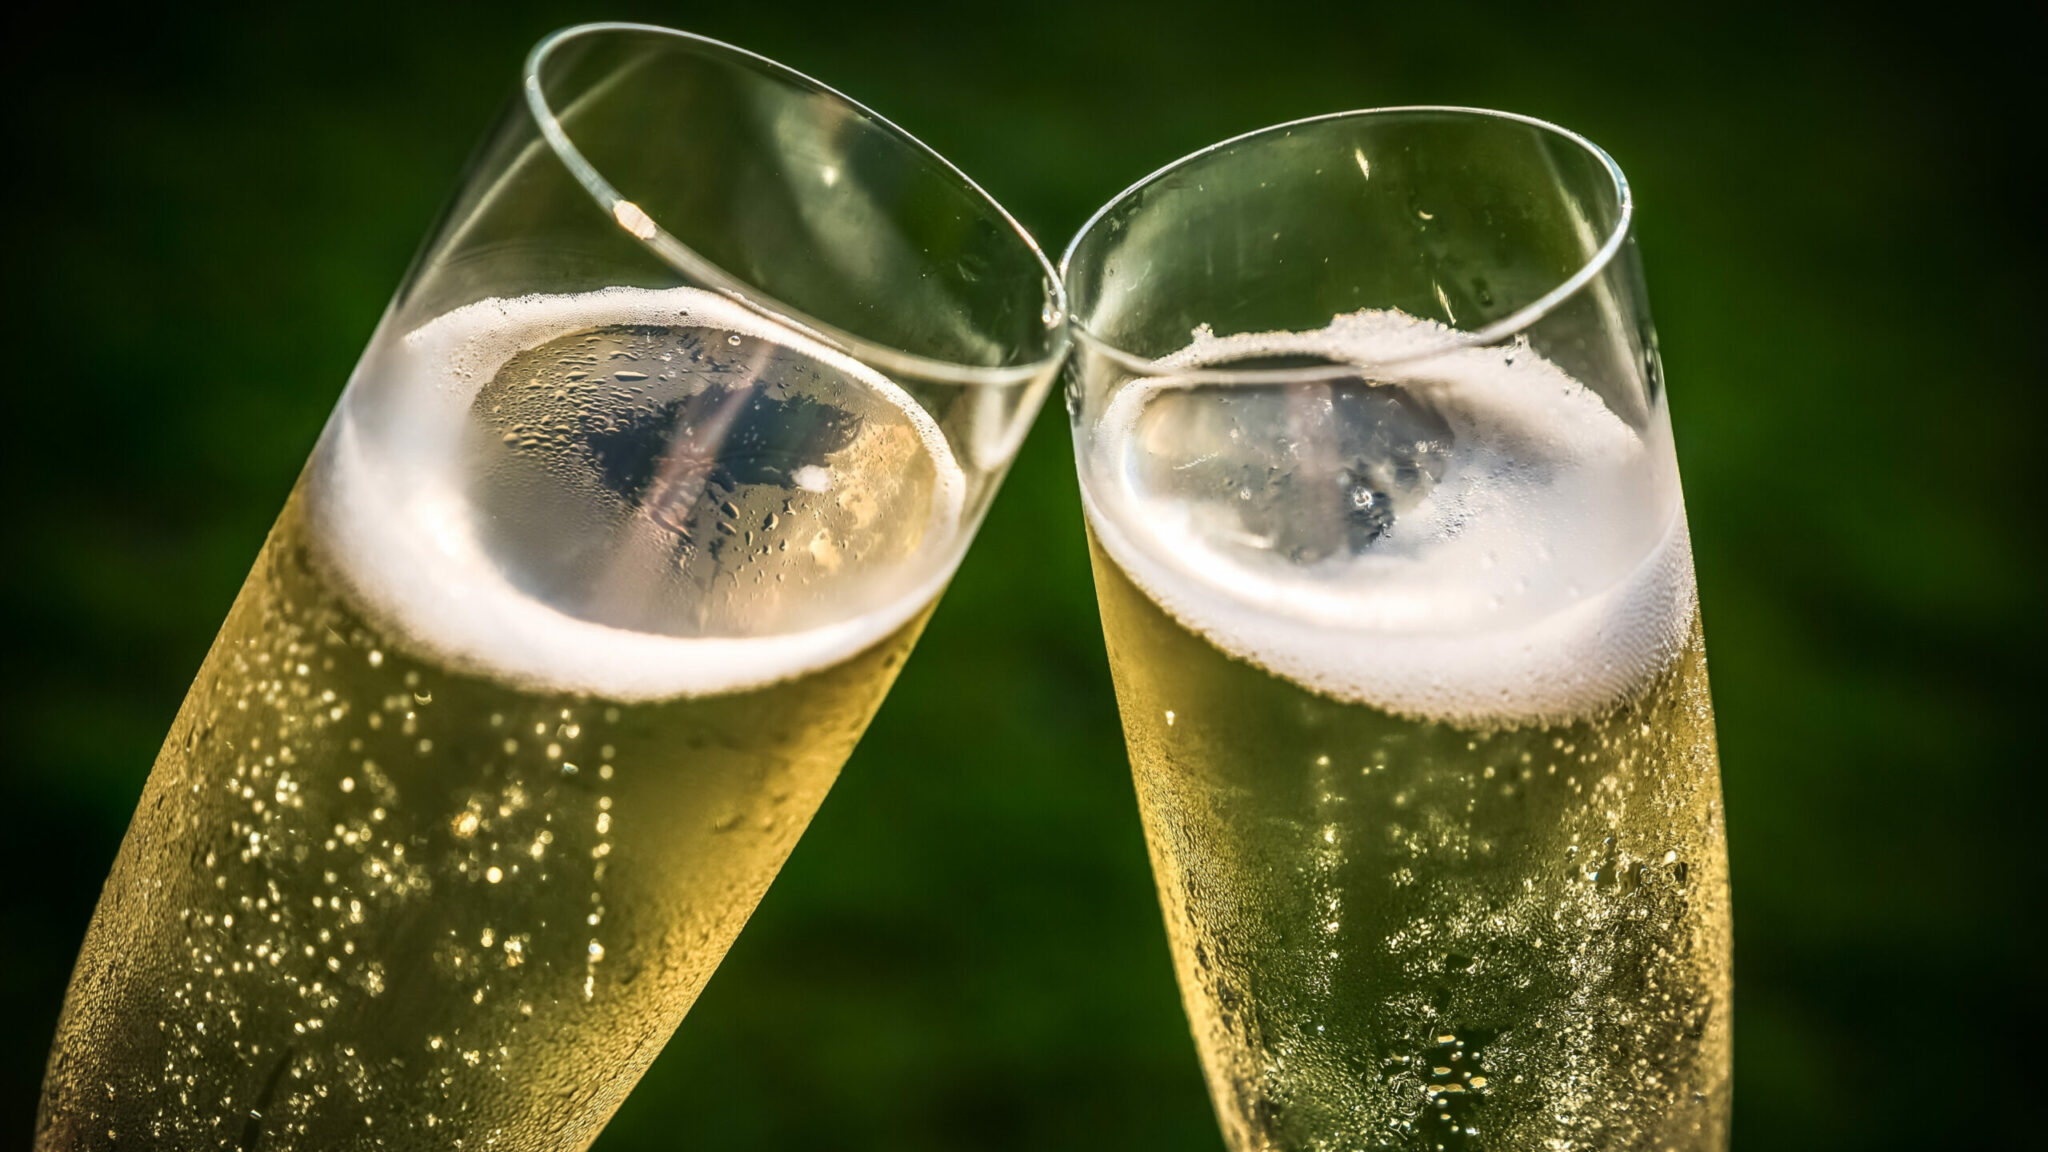 why does a glass of champagne have smaller and fewer bubbles than a glass of beer scaled